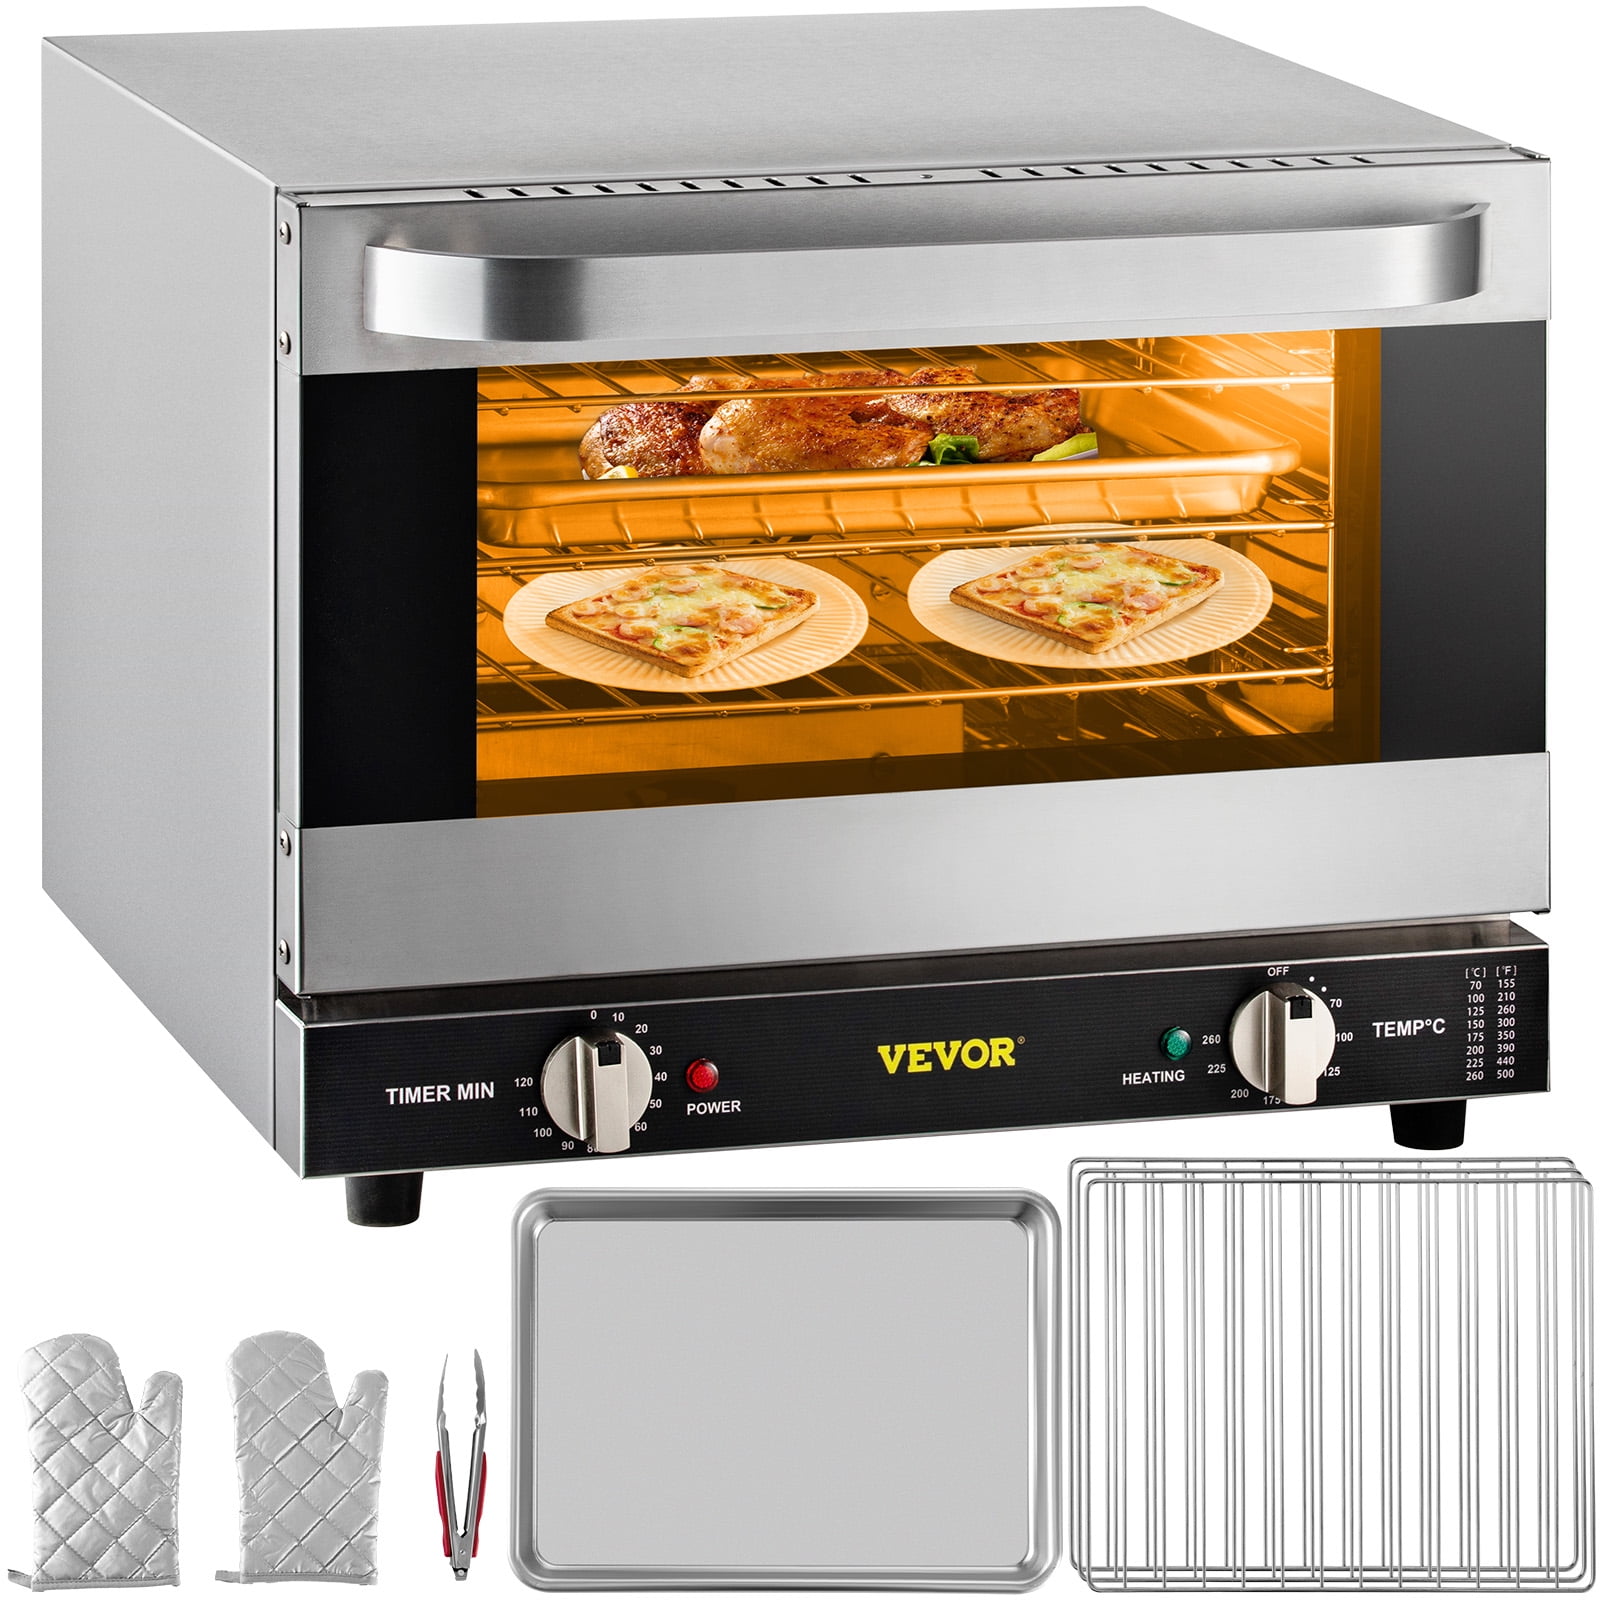 Commercial Oven For Sale - Best Buy